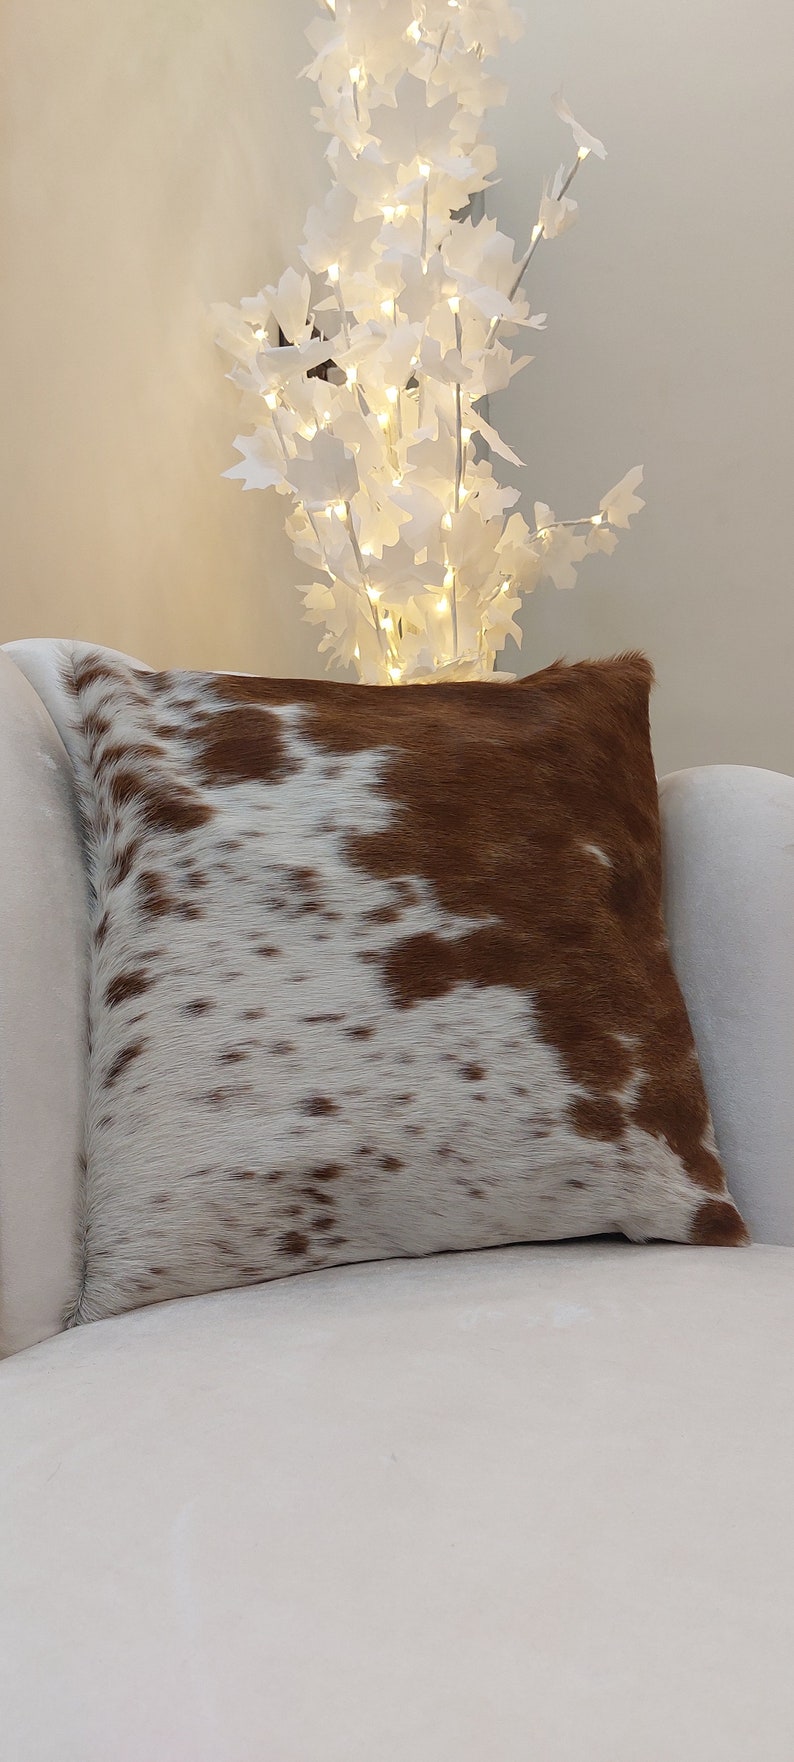 Cowhide Pillow Cover Brown And White Cowhide Cushion Natural Hair On Throw Cushion Covers Genuine Cow Hide Real Original Skin Leather Pillow image 10